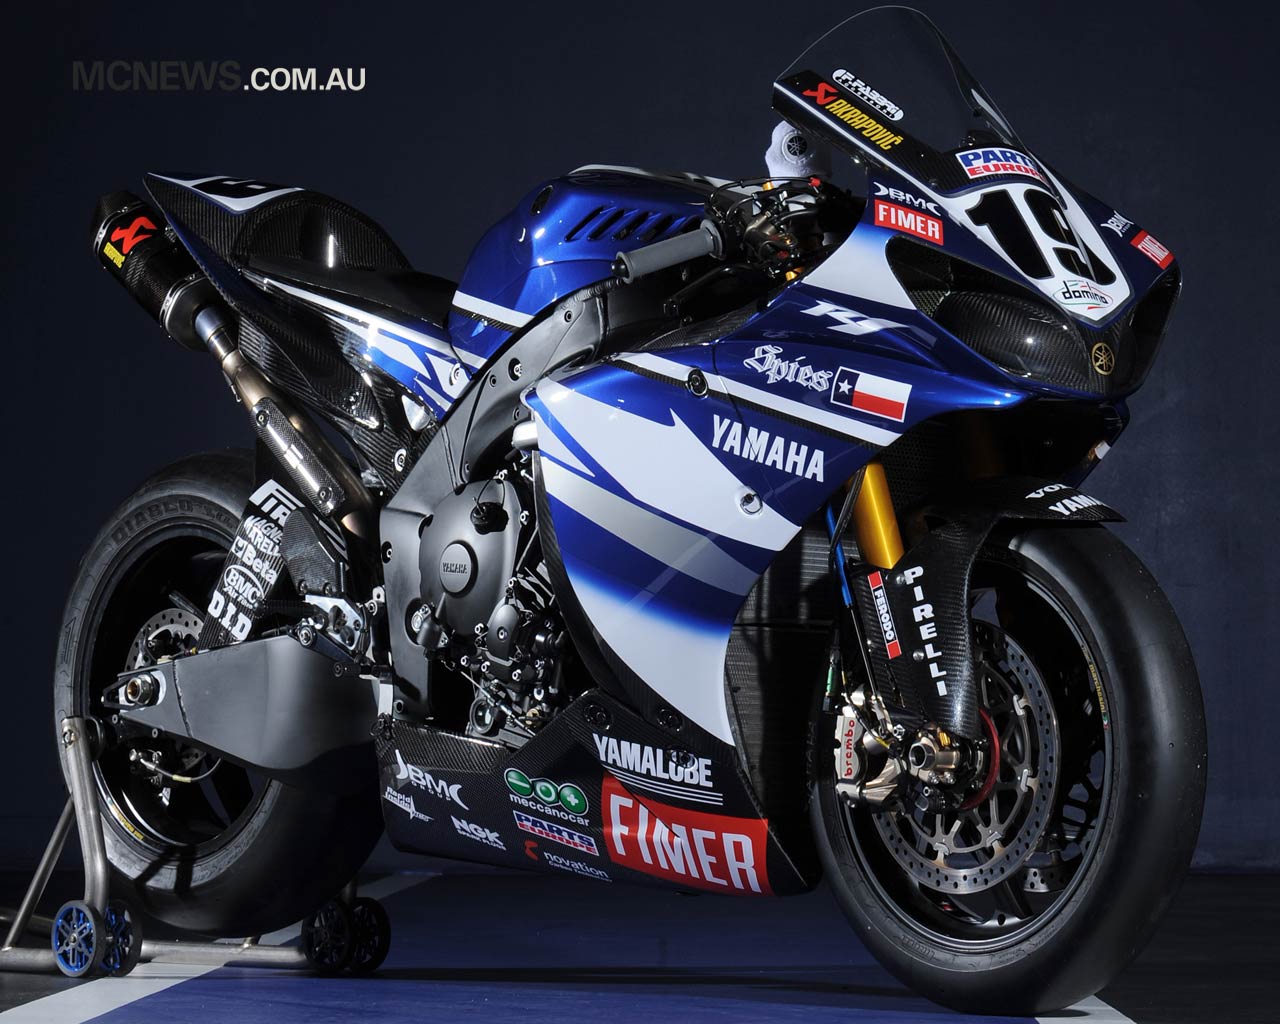 Yamaha YZF R1 Desktop Wallpapers for HD Widescreen and Mobile 1280x1024